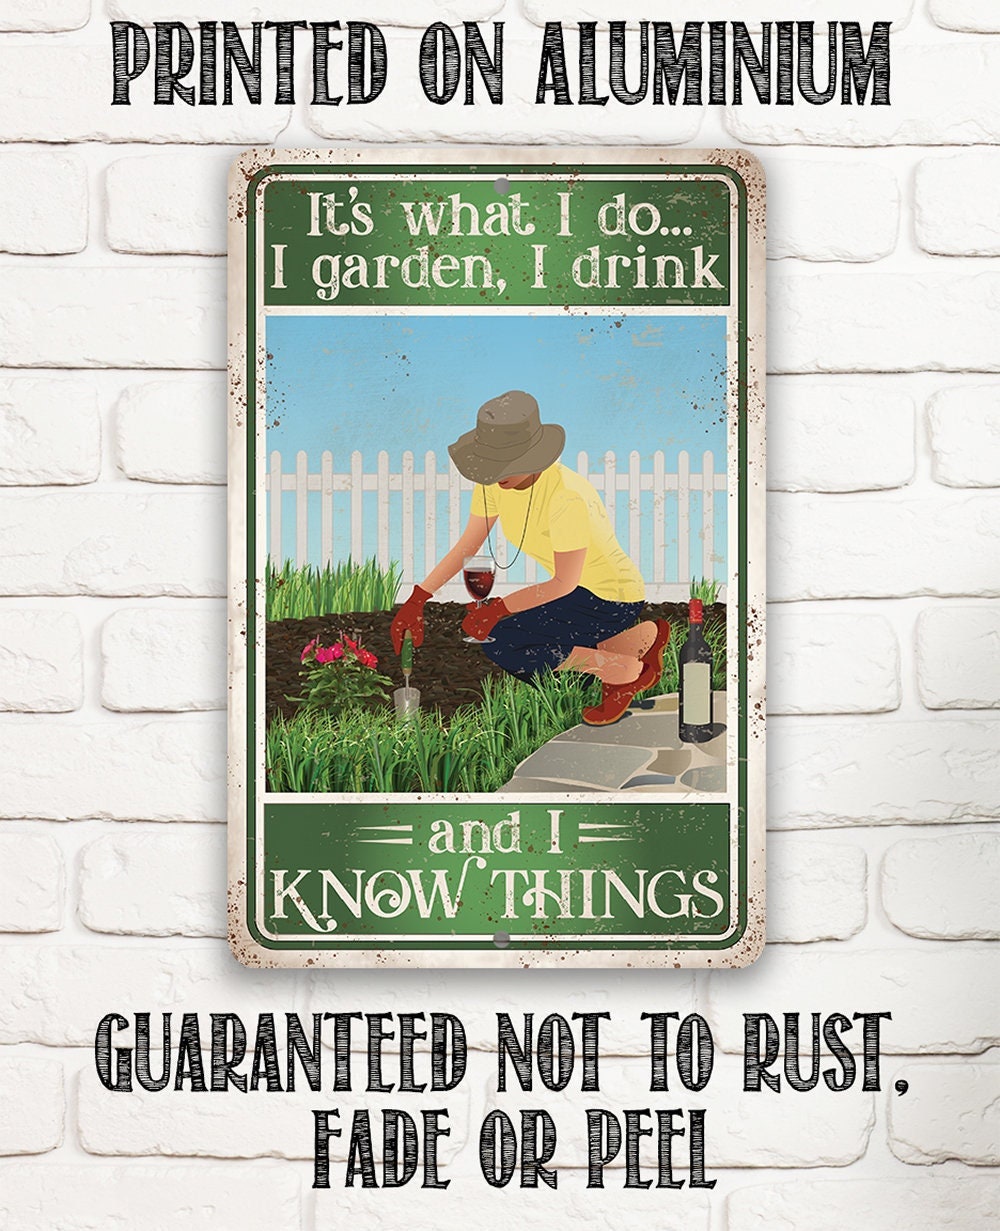 It's What I Do, I Garden, I Drink And I Know Things - 8" x 12" or 12" x 18" Aluminum Tin Awesome Metal Poster Lone Star Art 